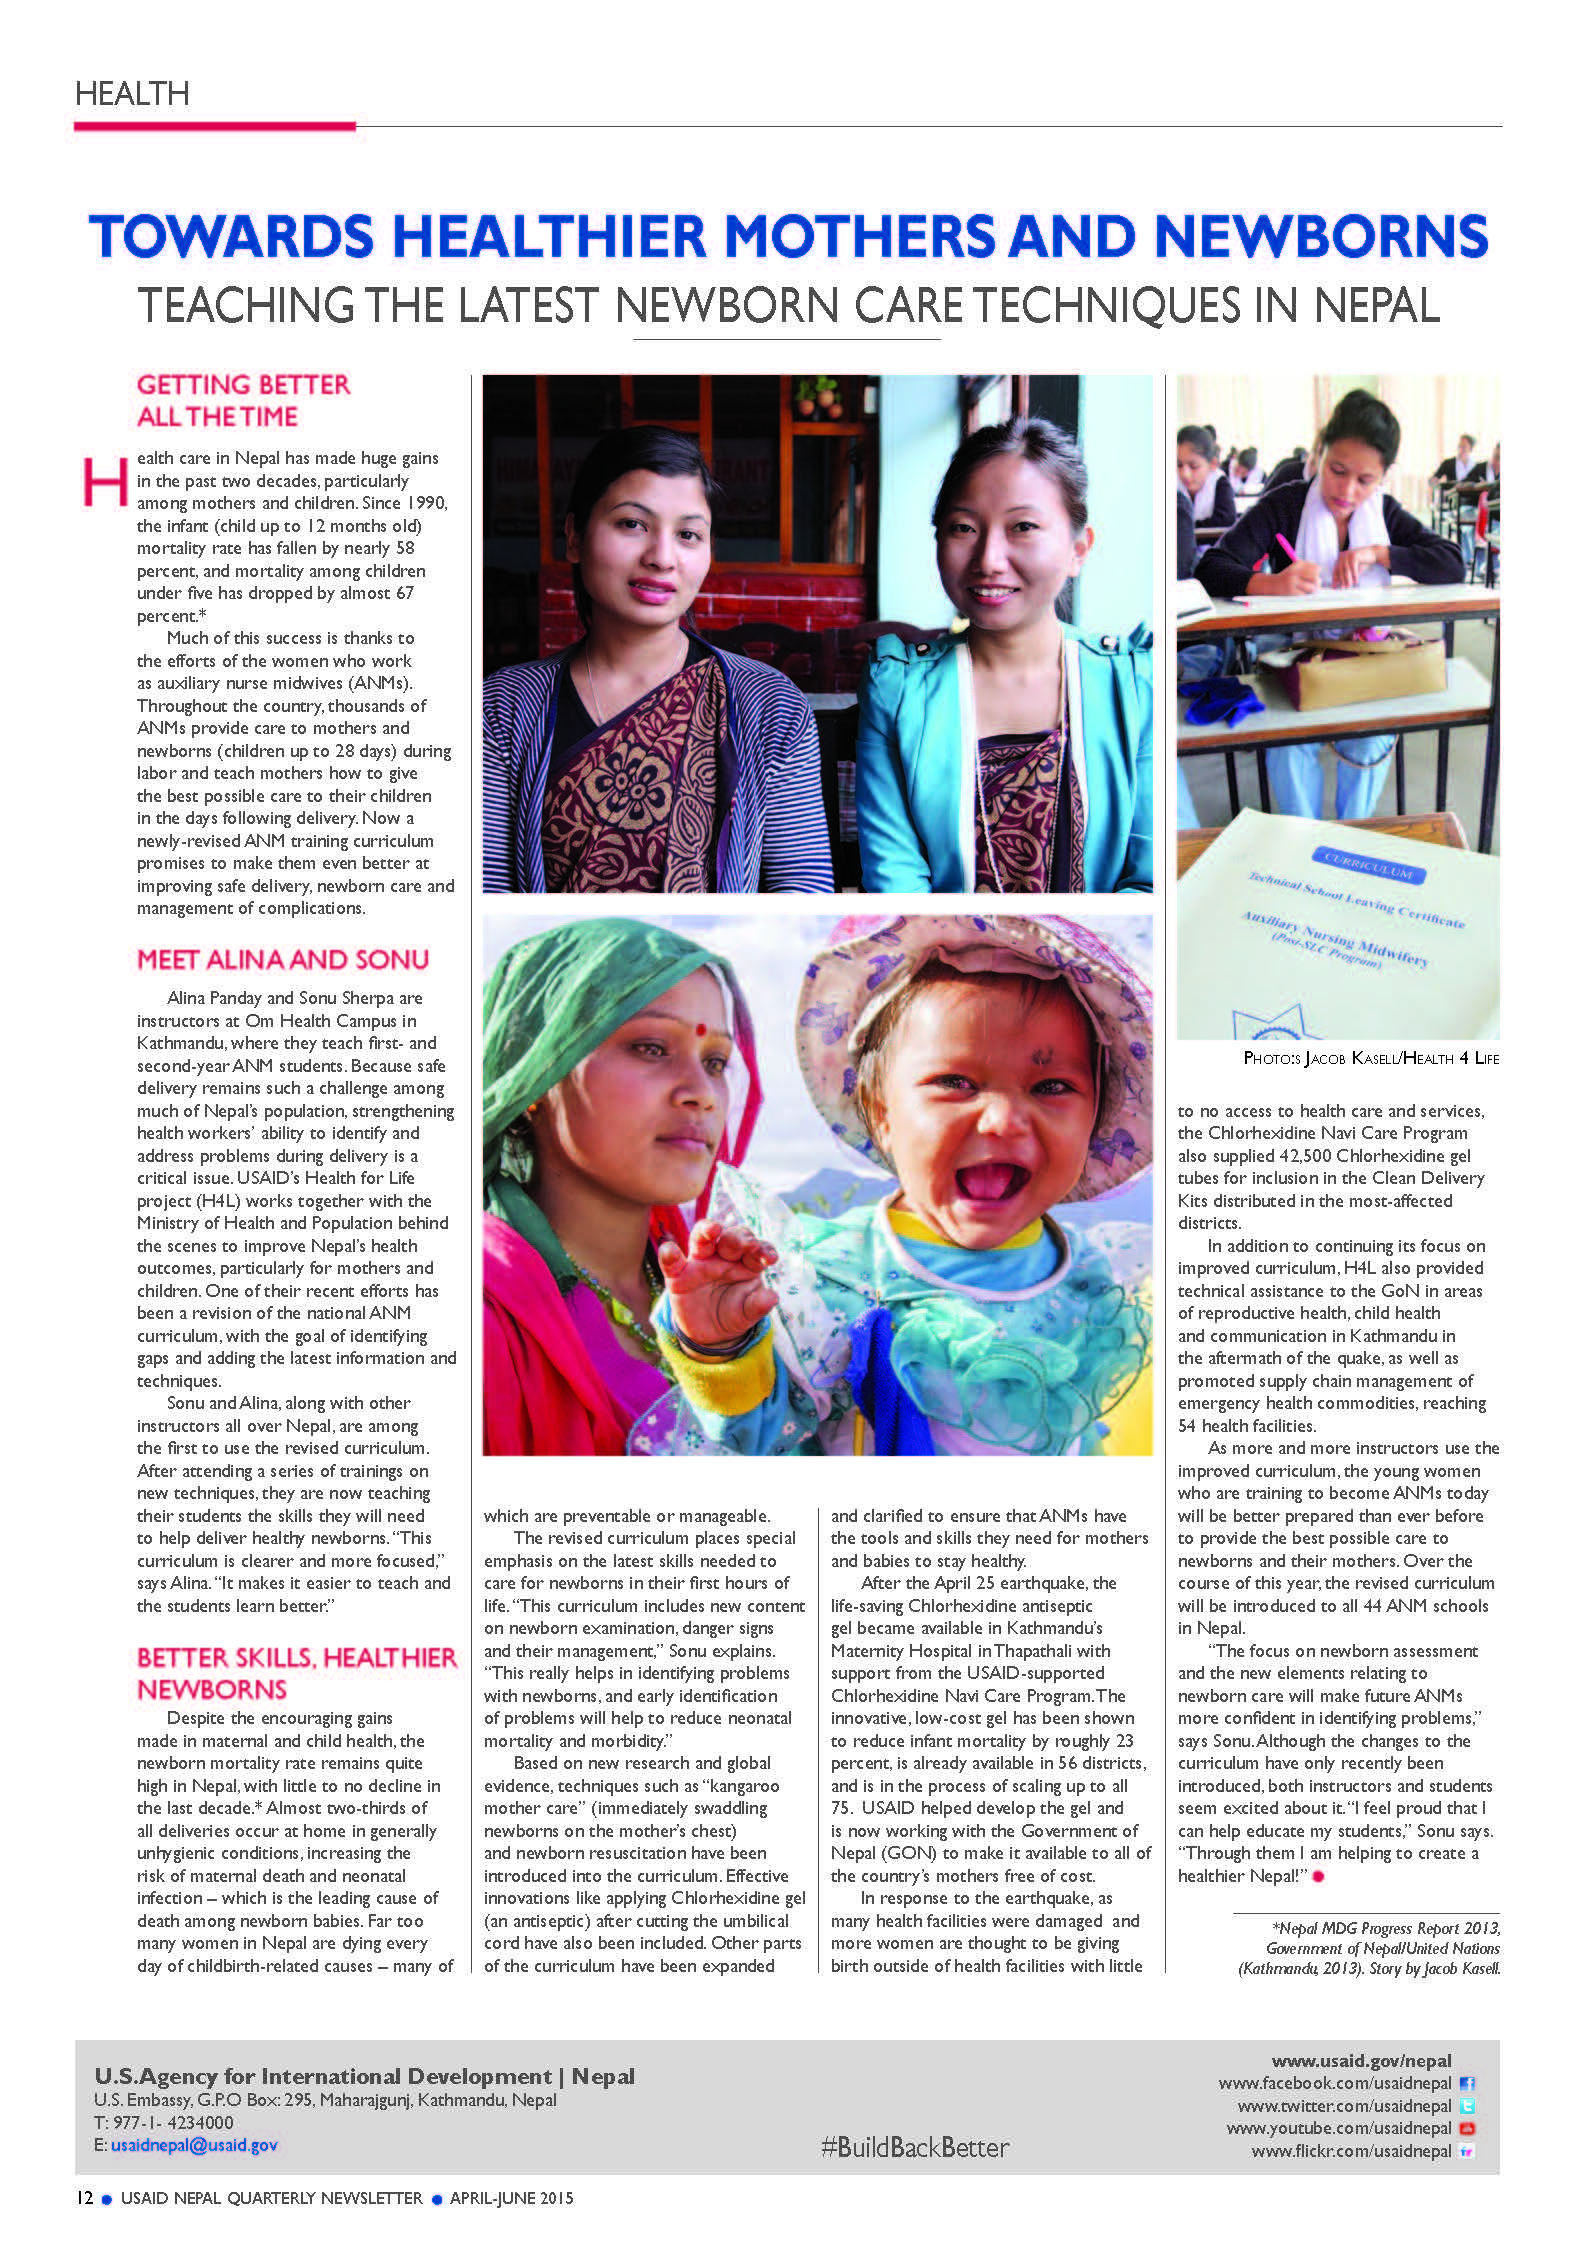 TOWARDS HEALTHIER MOTHERS AND NEWBORNS:TEACHING THE LATEST NEWBORN CARE TECHNIQUES IN NEPAL